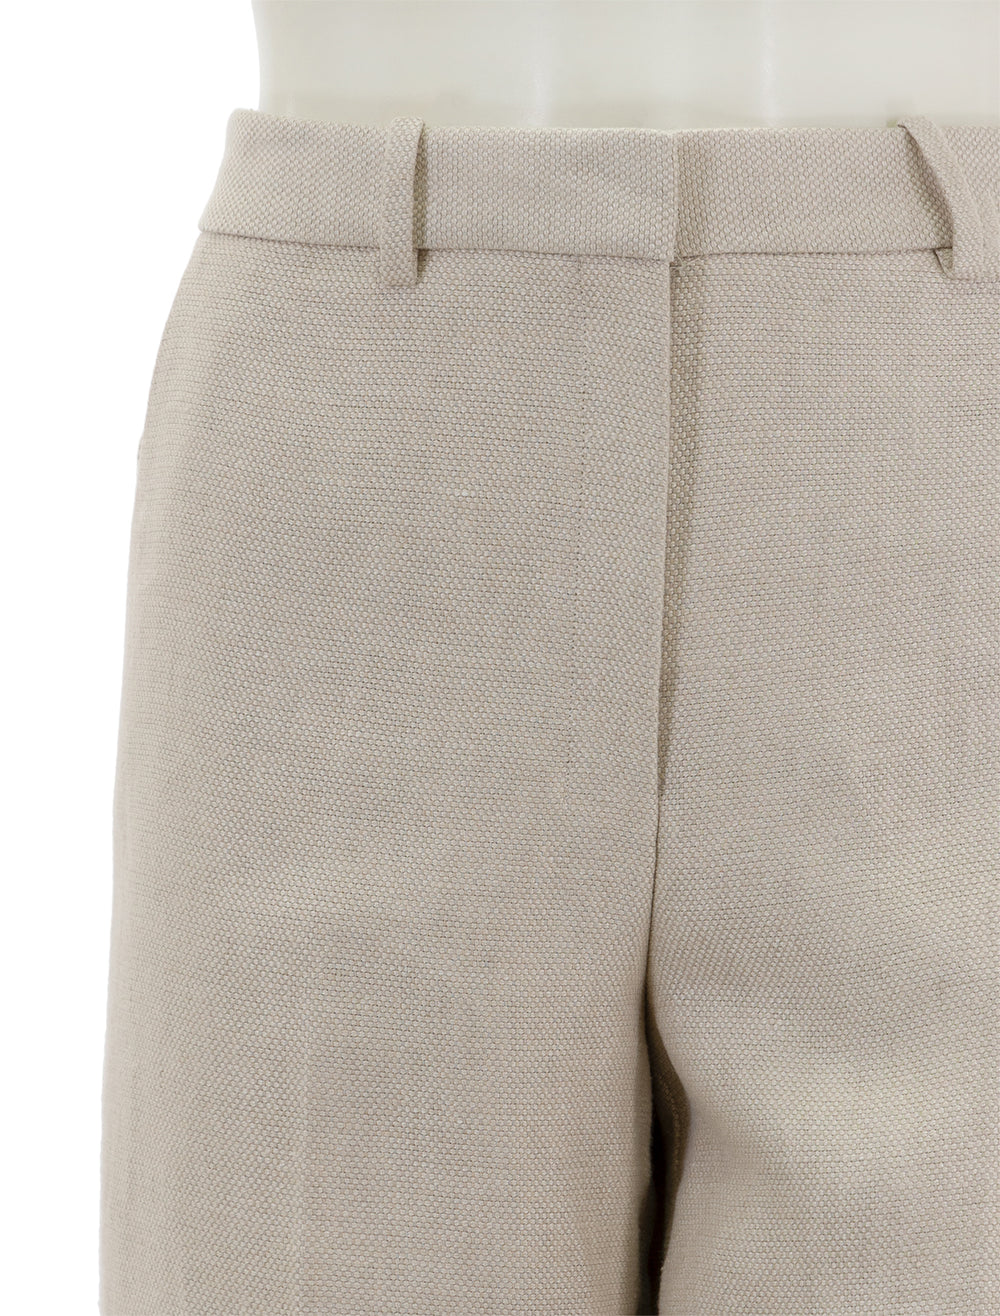 Close-up view of Theory's clean trouser in straw basketweave linen.